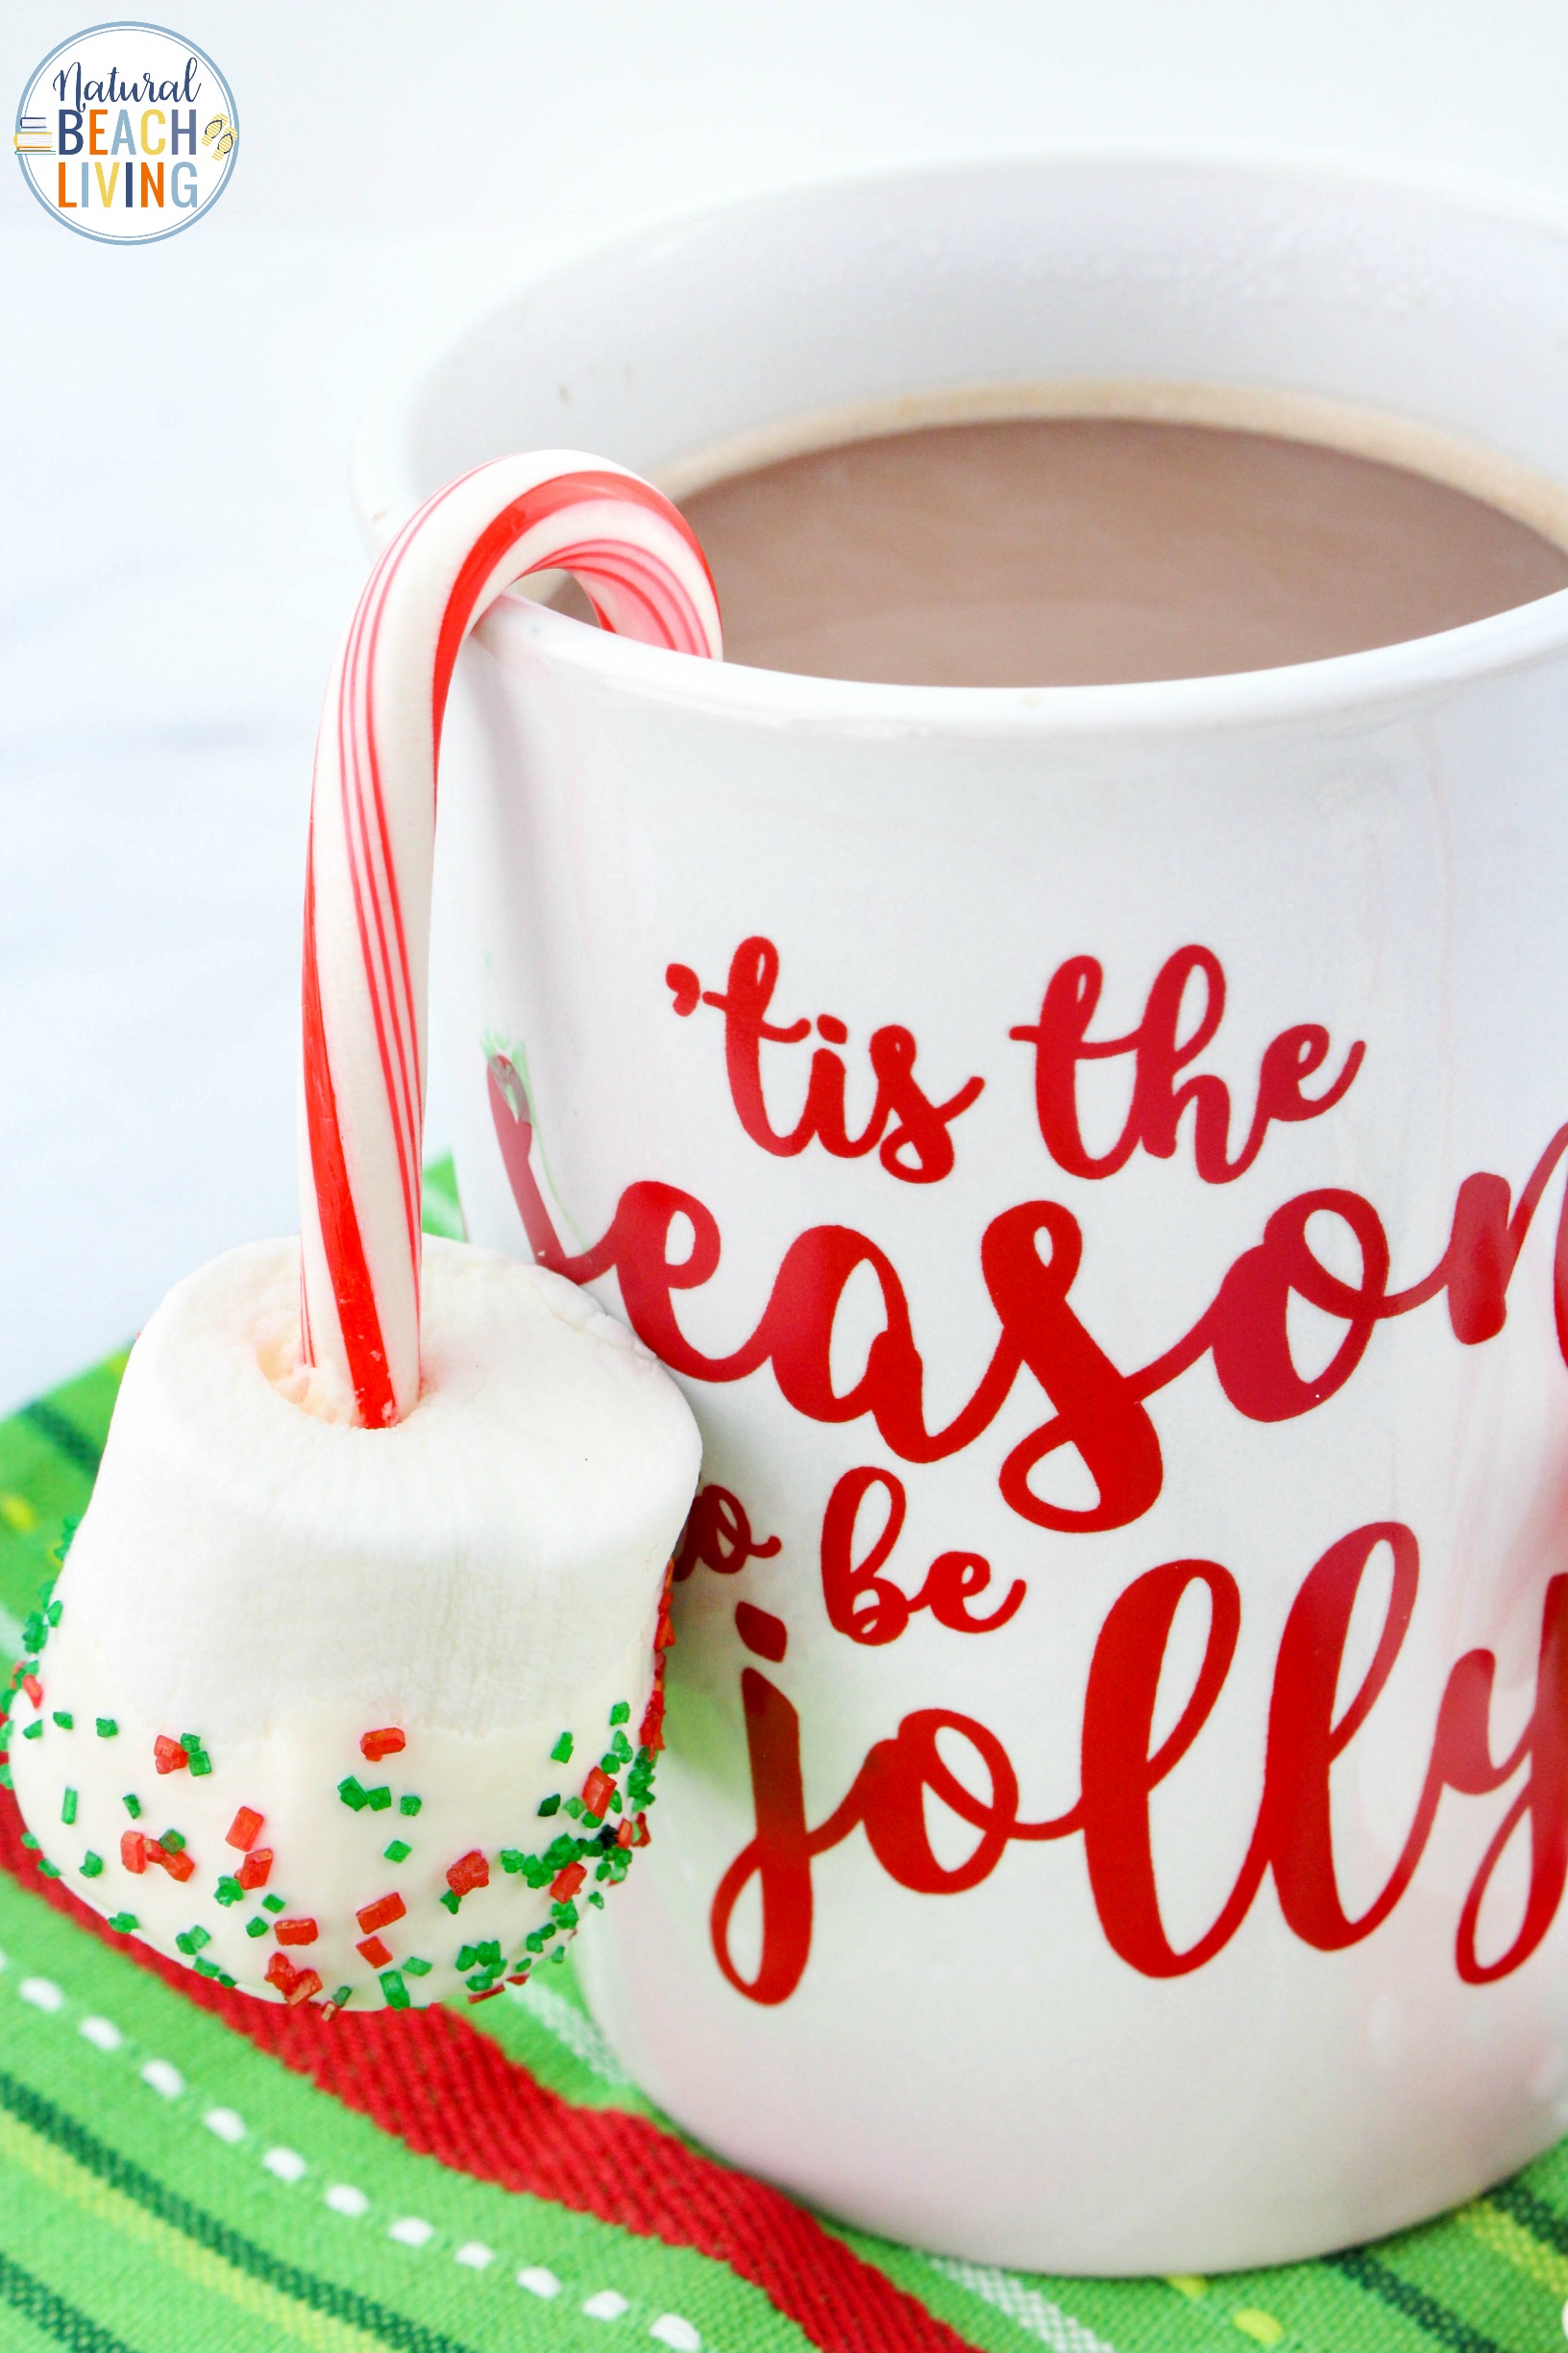 These Candy Cane Marshmallow Hot Chocolate Dippers are so simple and only have 4 ingredients! It's a quick way to make a delicious winter treat! Easy Hot Chocolate Stirrersfor a snack on a Cold Winter Day. hot chocolate dippers recipe, Peppermint hot chocolate dippers, candy cane hot chocolate dippers, candy cane marshmallow pops